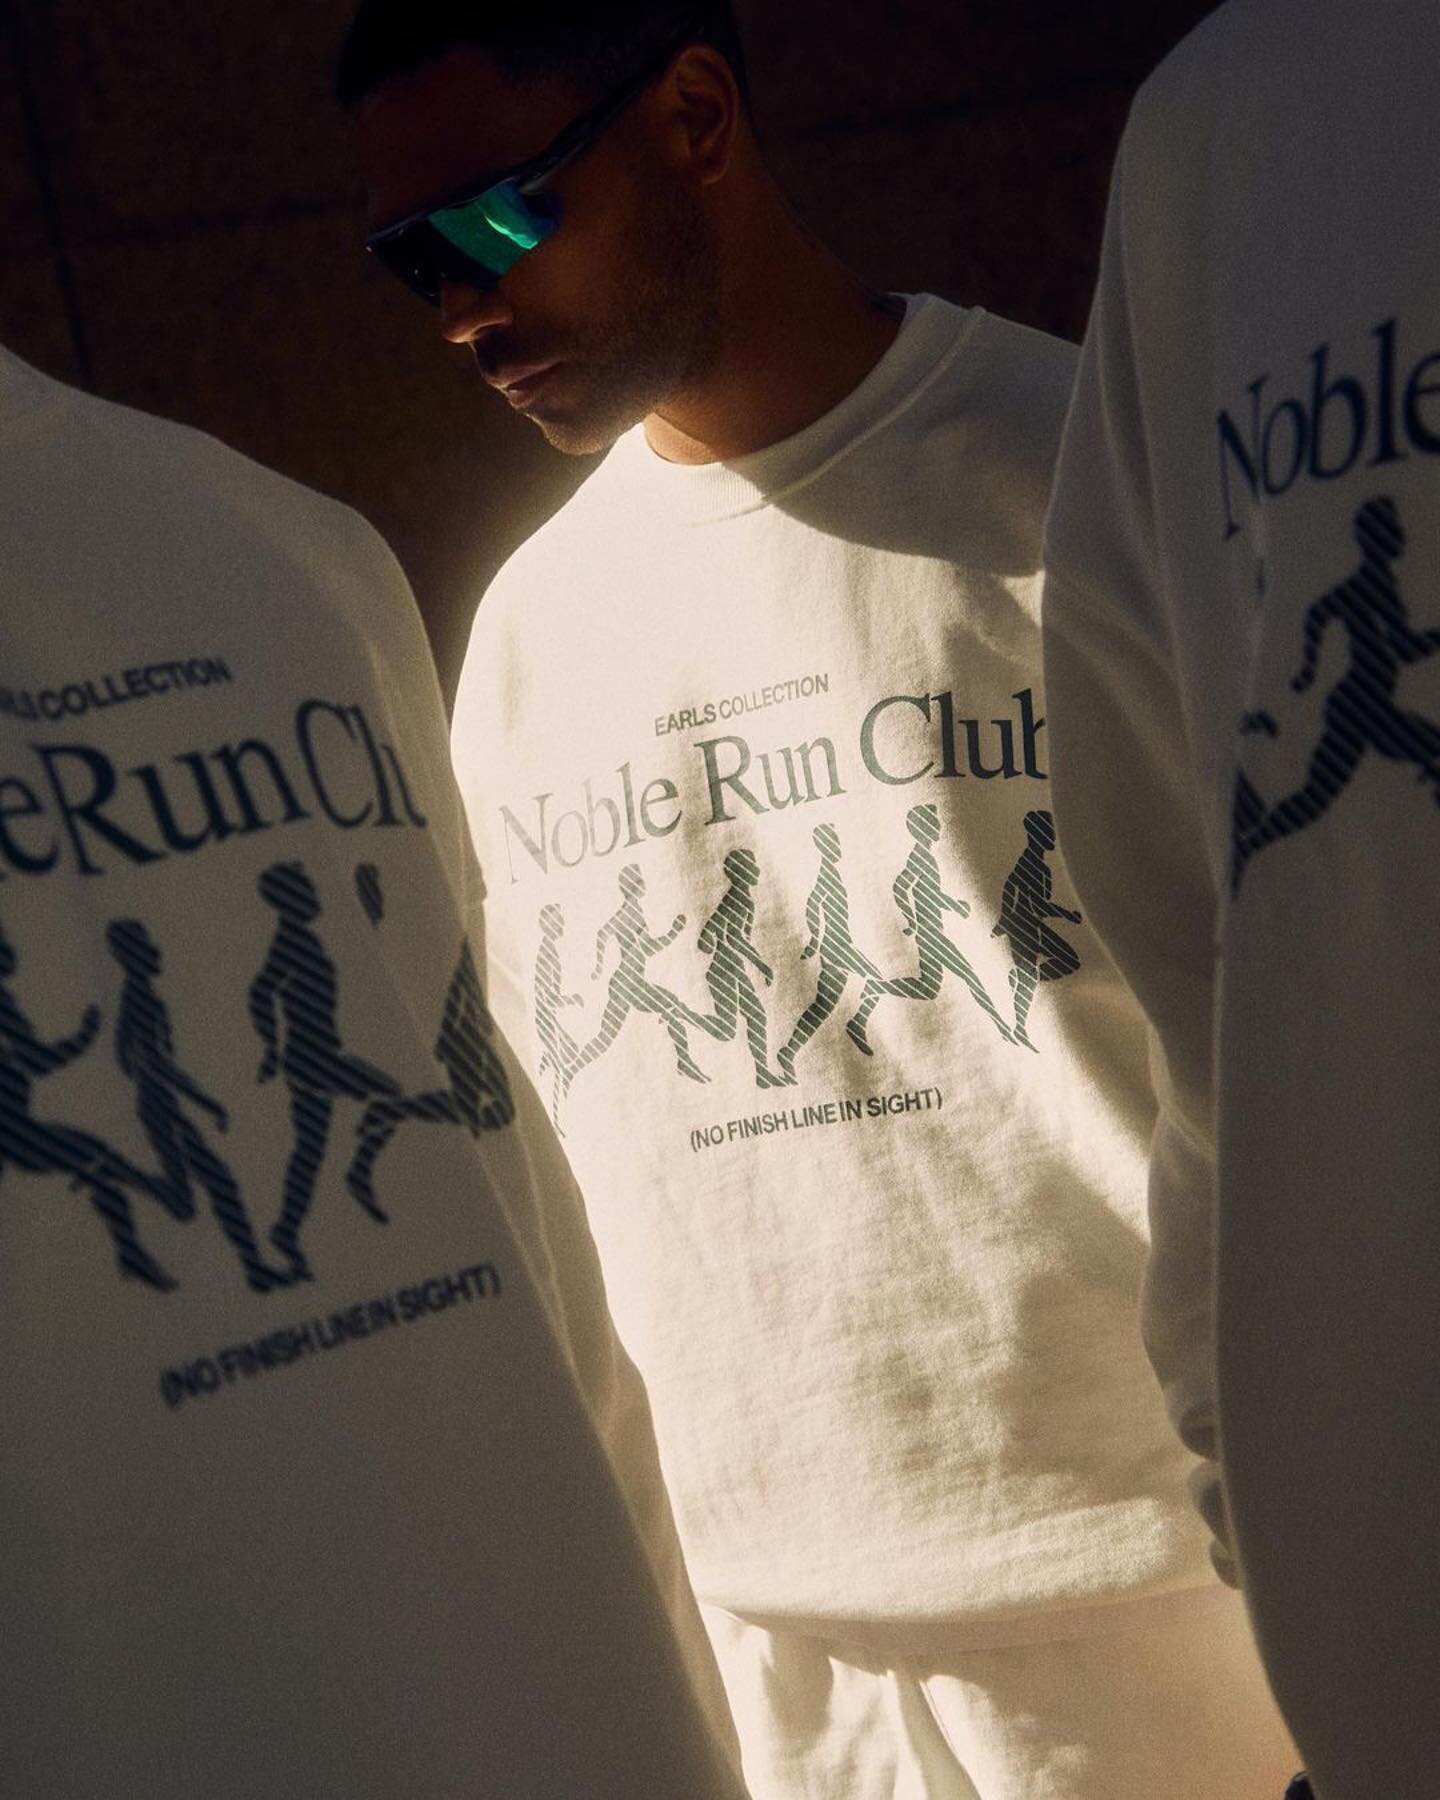 Noble Run Club @earlscollection.

Uncommon Artist: Photography by @lewisstevenson_